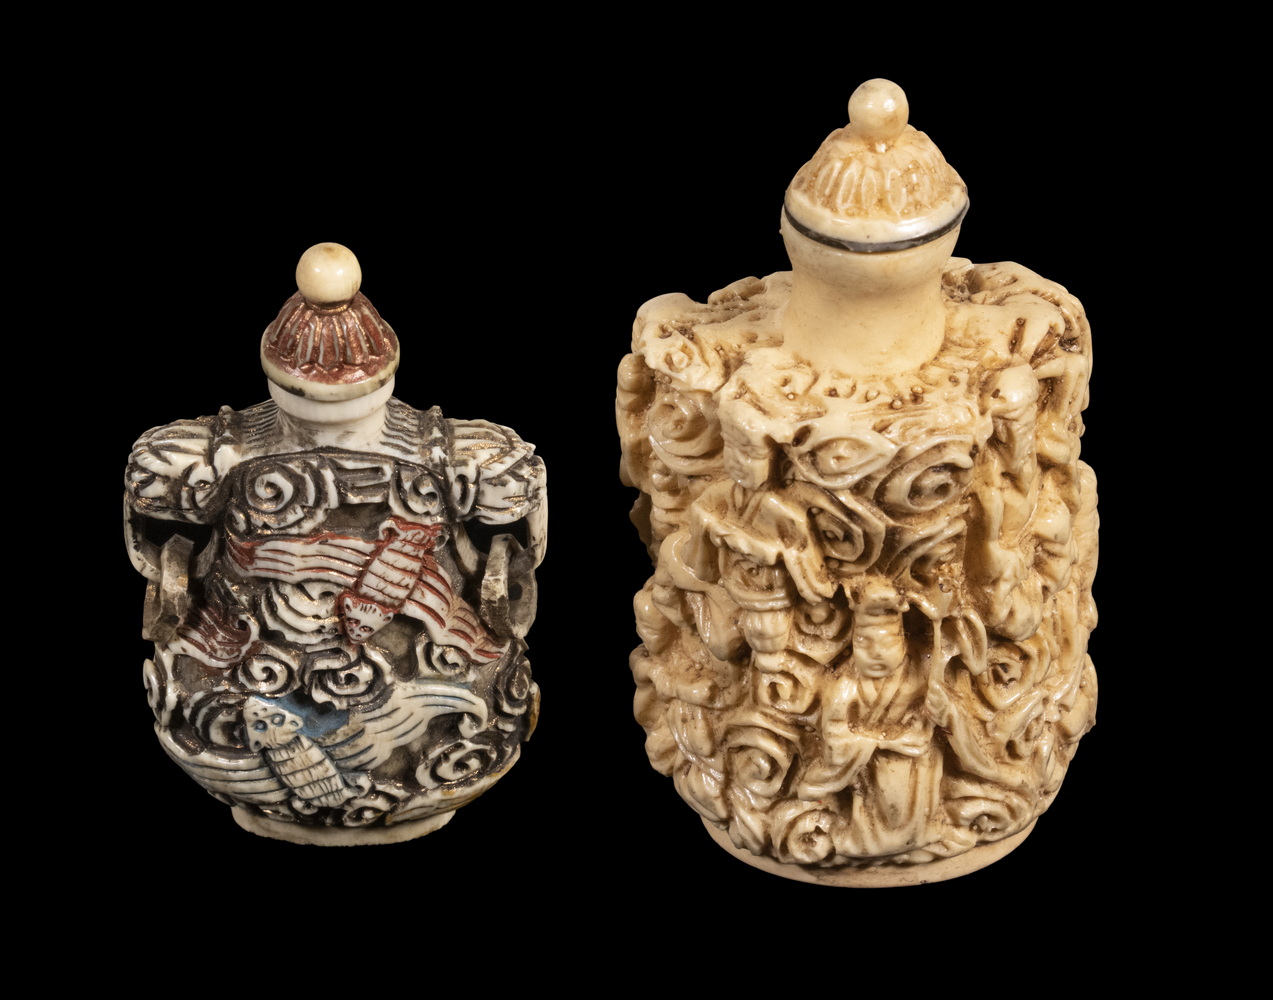  2 CHINESE RELIEF CARVED SNUFF 2b2dcd